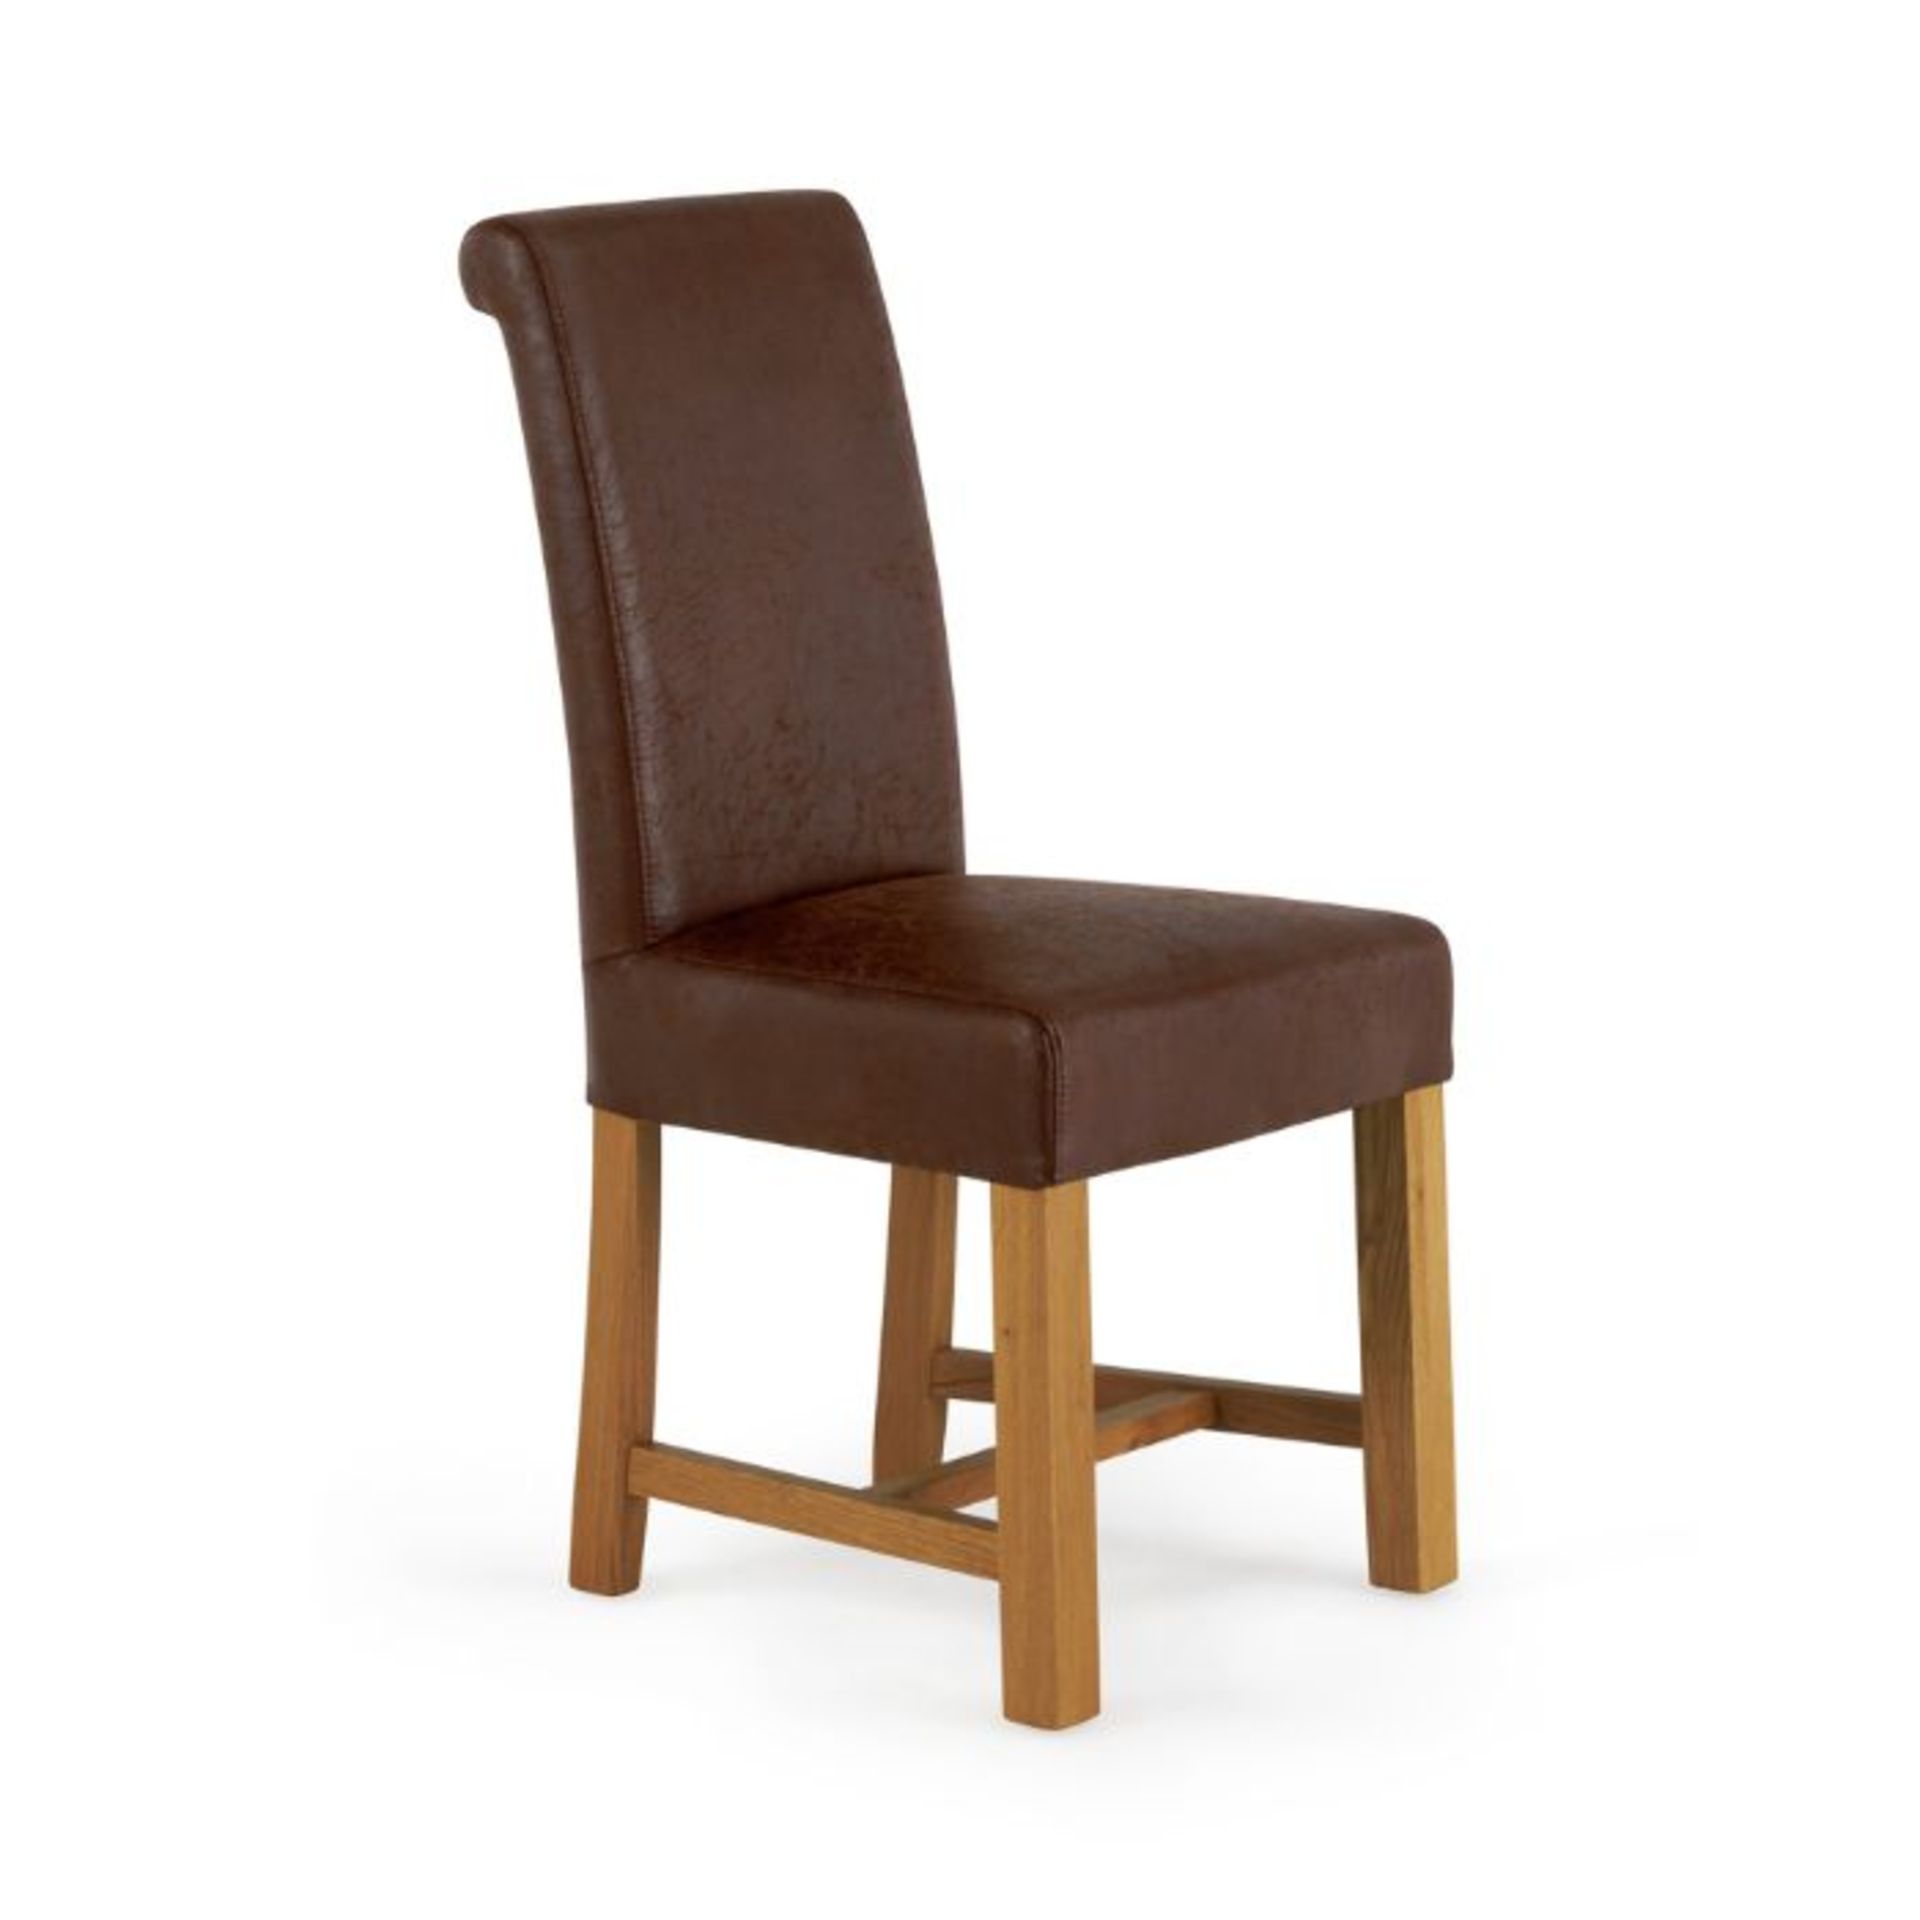 Oak Furnitureland Scroll Back Chair in Antiqued Brown Fabric with Solid Oak Legs RRP £380.00 - Image 3 of 3